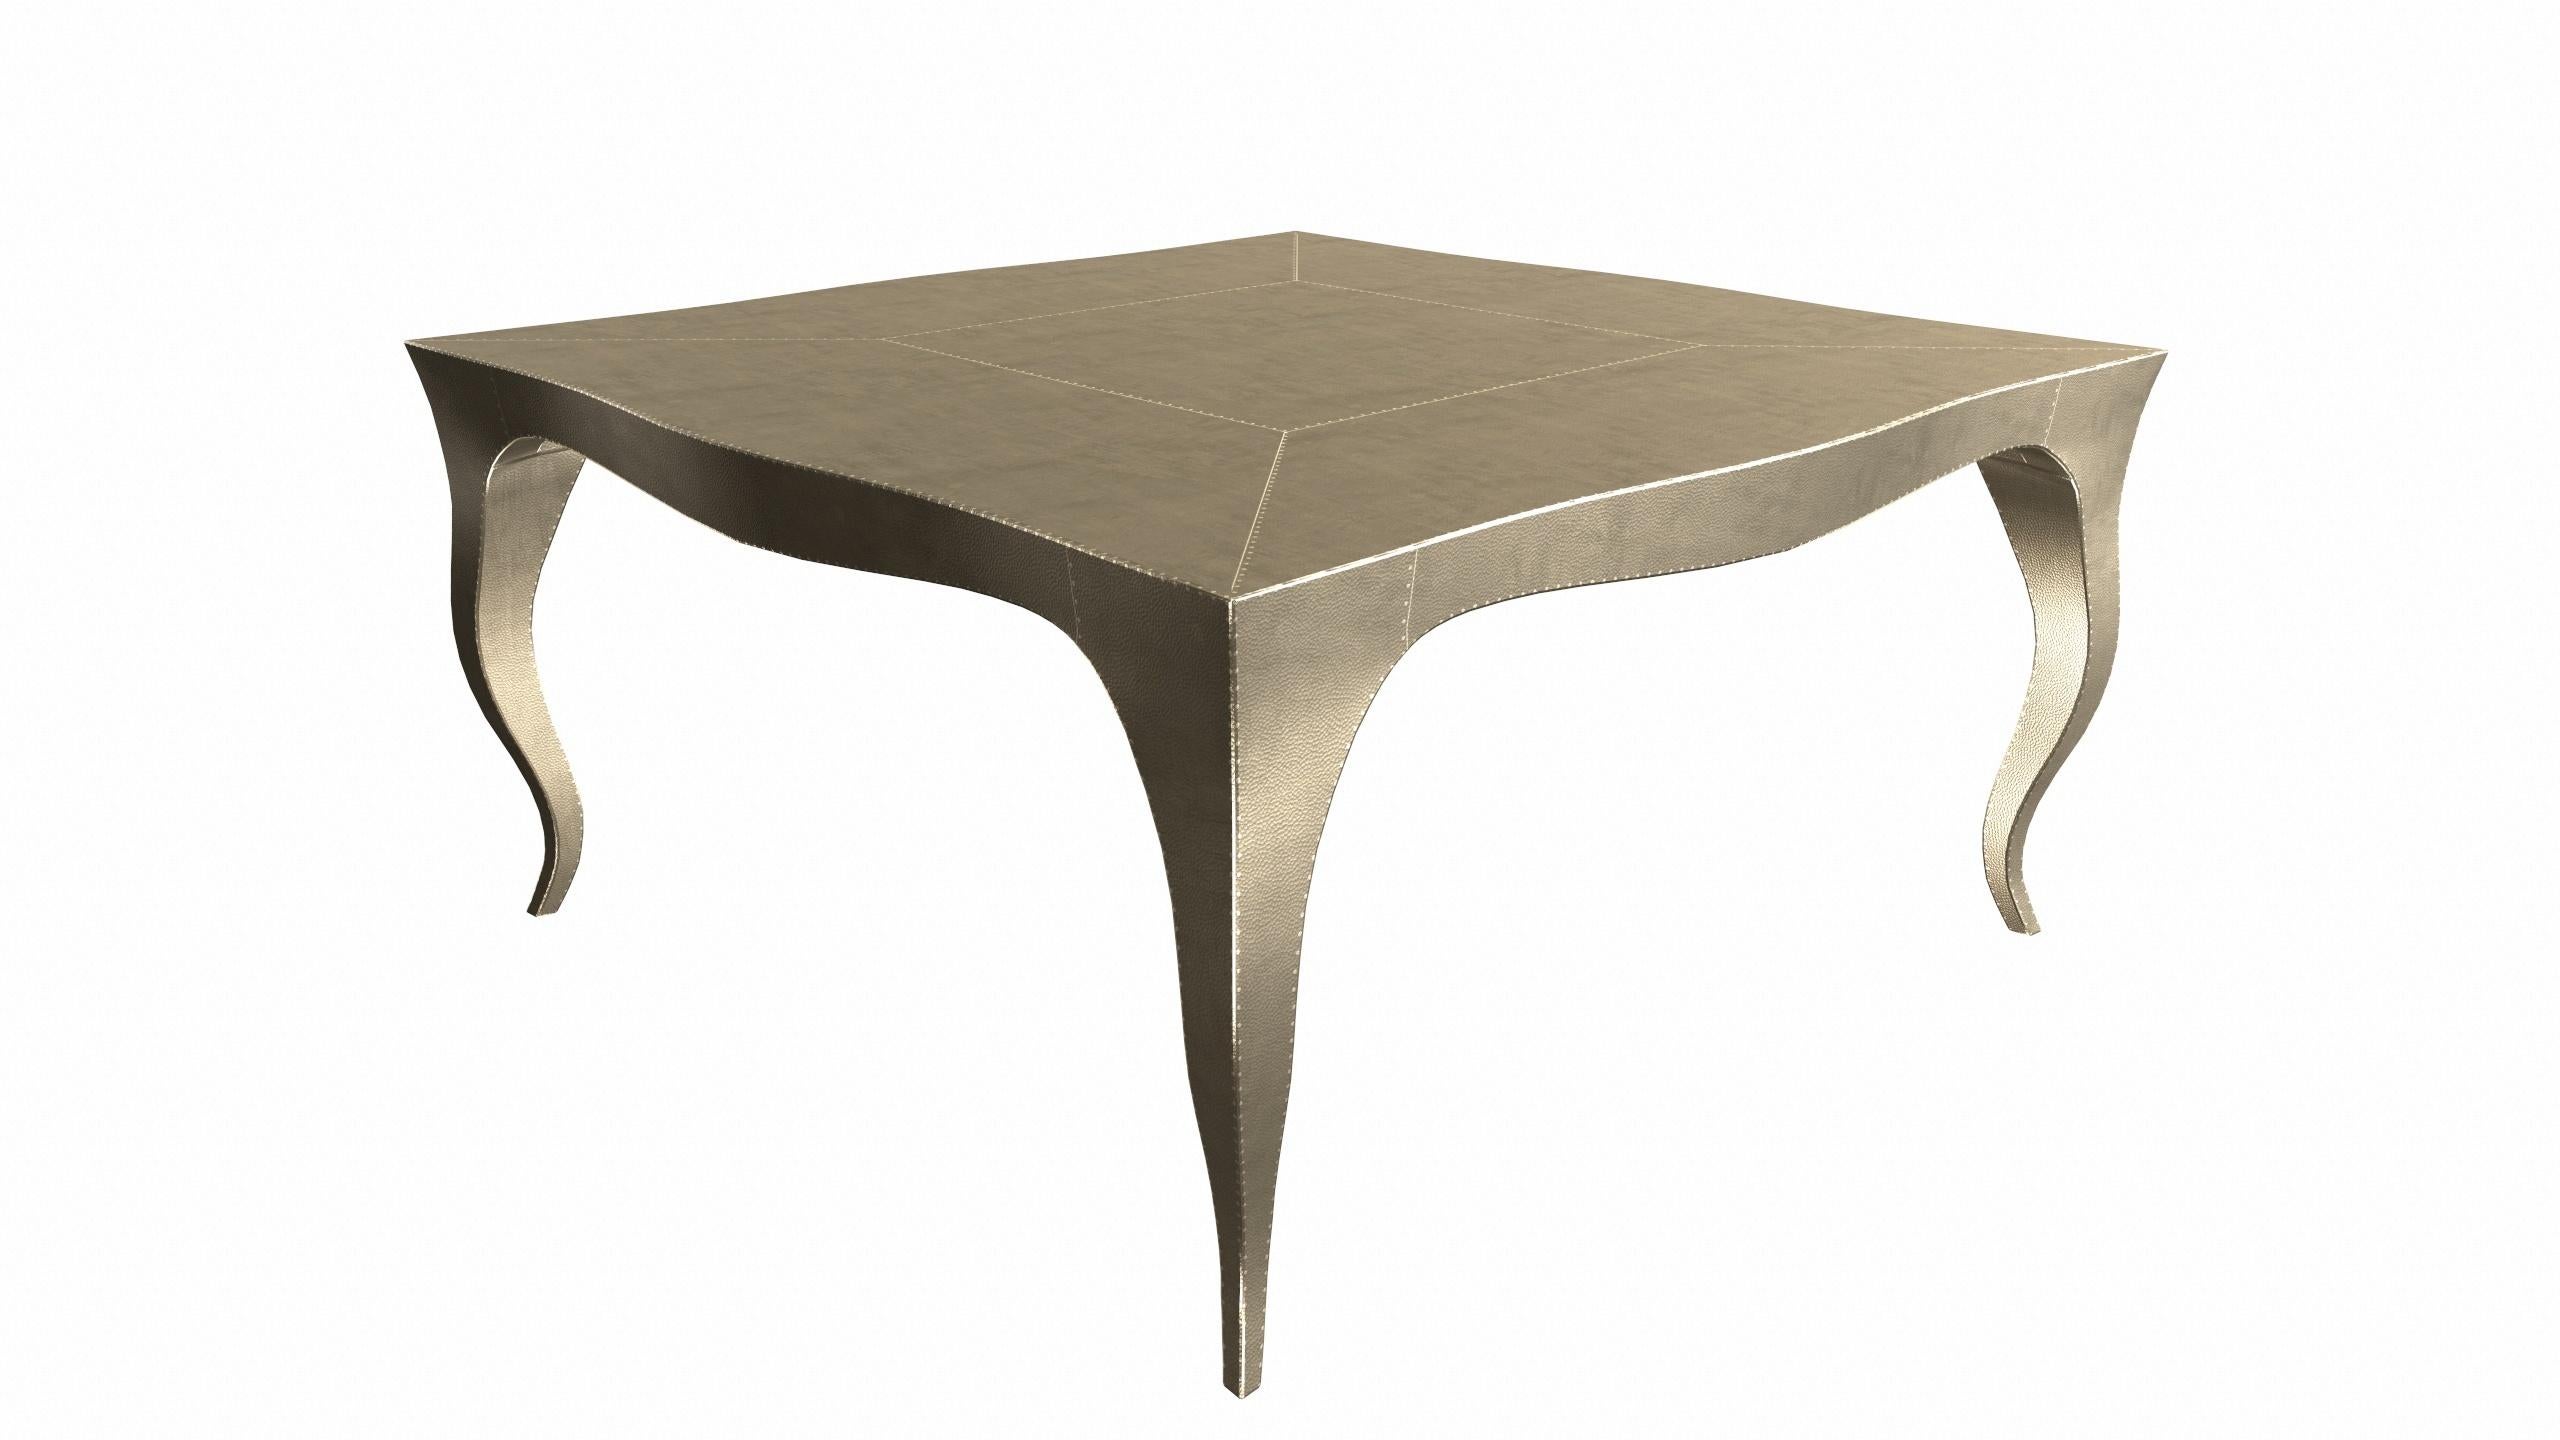 Other Louise Art Deco Industrial and Work Tables Mid. Hammered Brass by Paul Mathieu For Sale